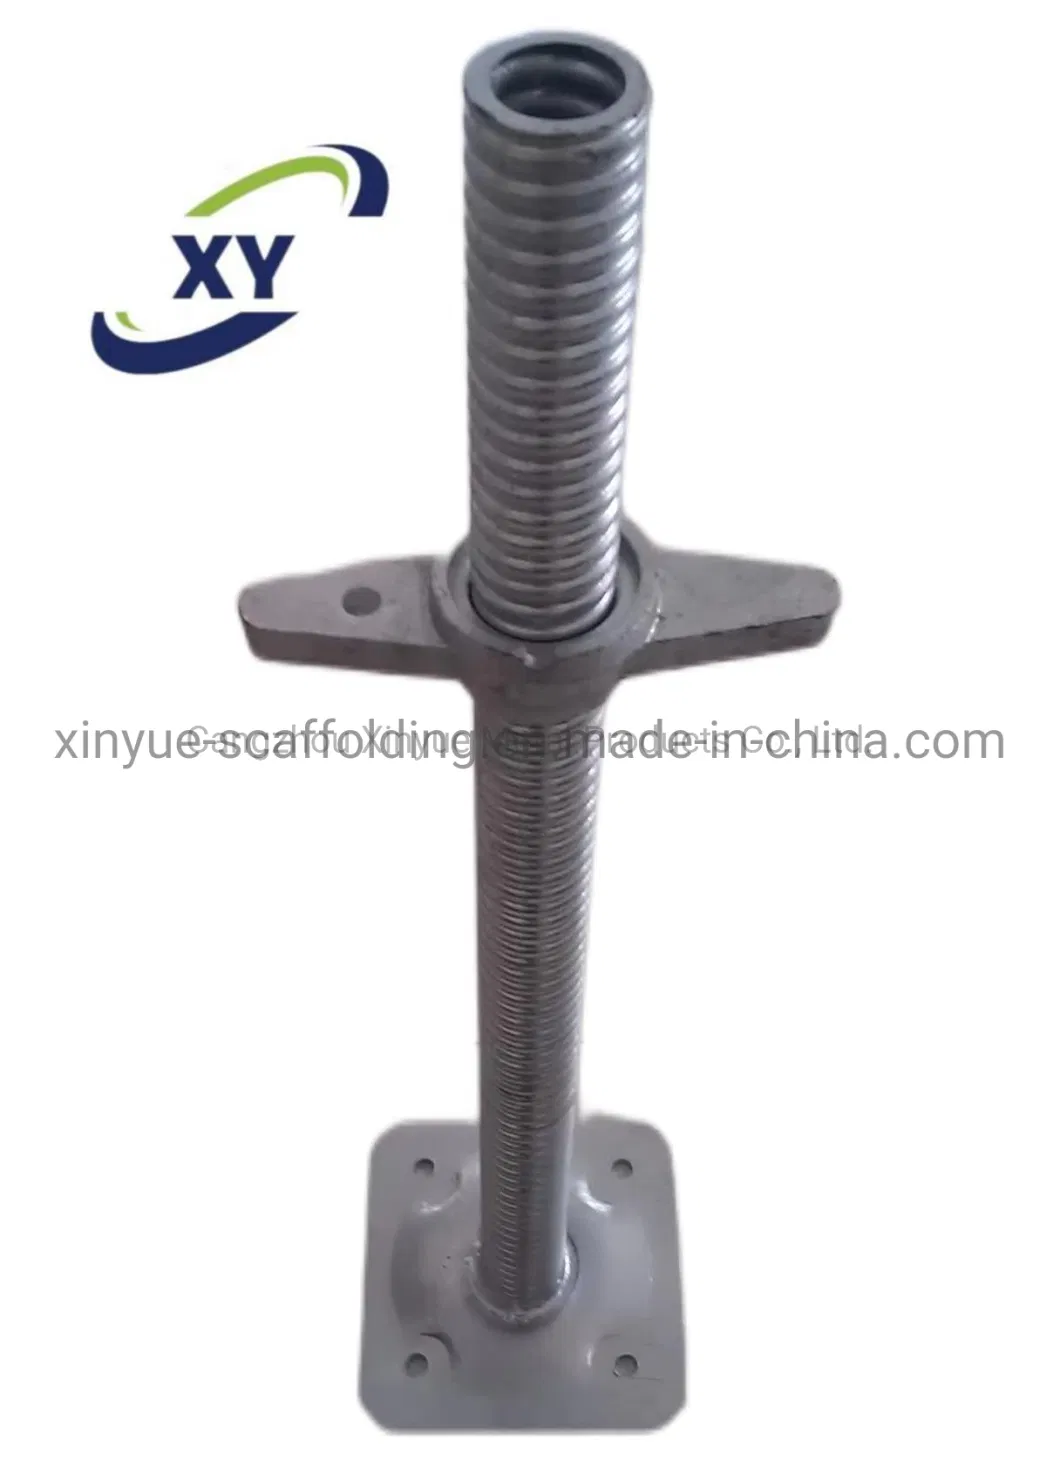 Factory Scaffold Adjustable Feet Scaffold Leveling Screw Jacks for Construction